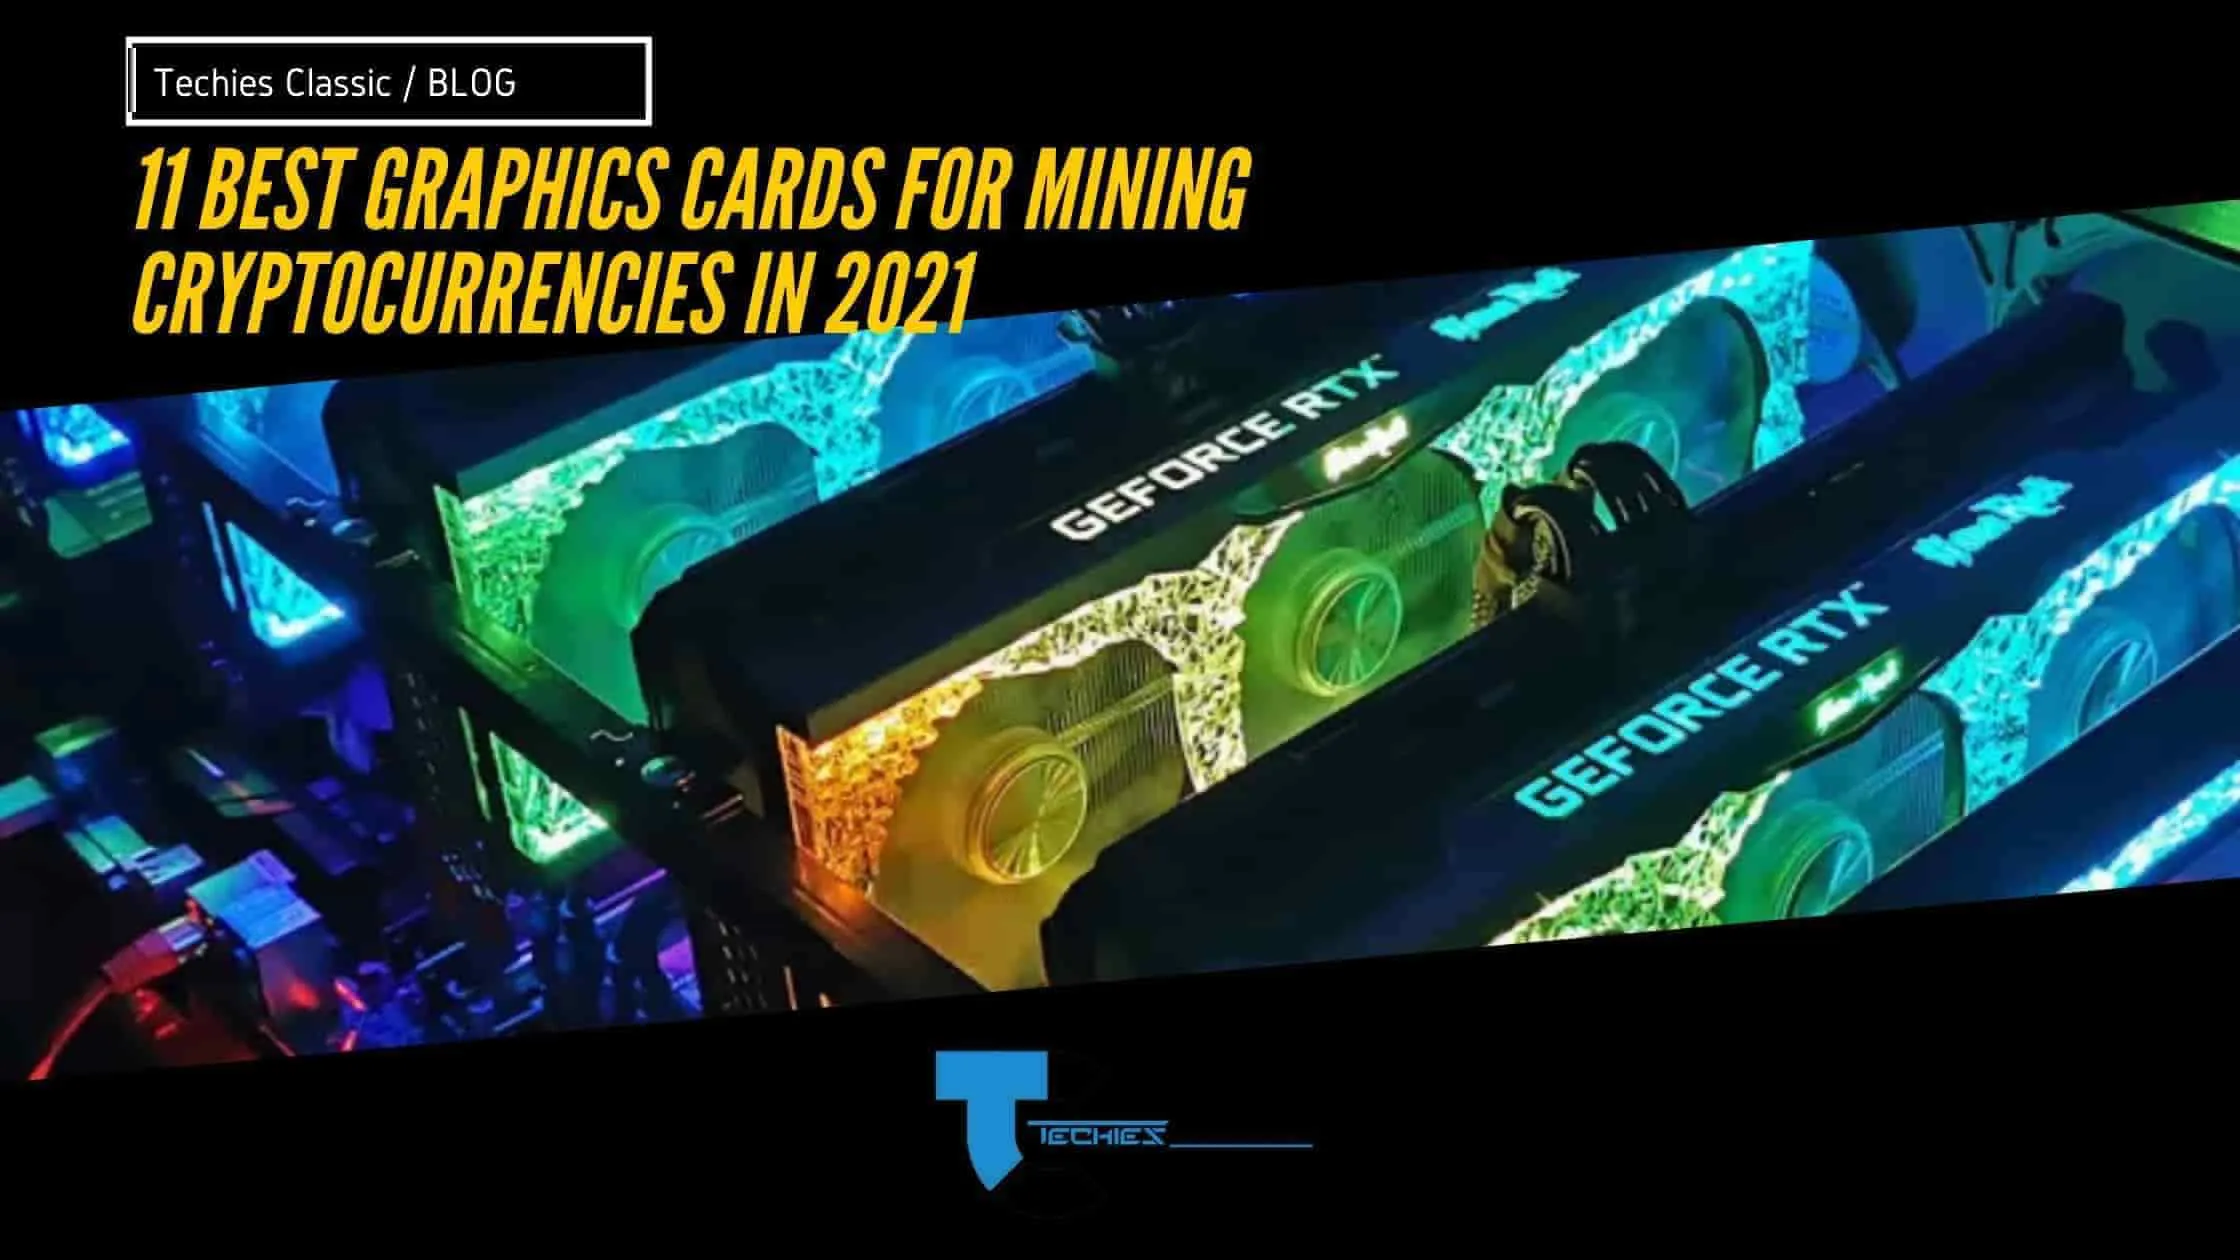 10 best graphics cards for mining cryptocurrencies in 2022